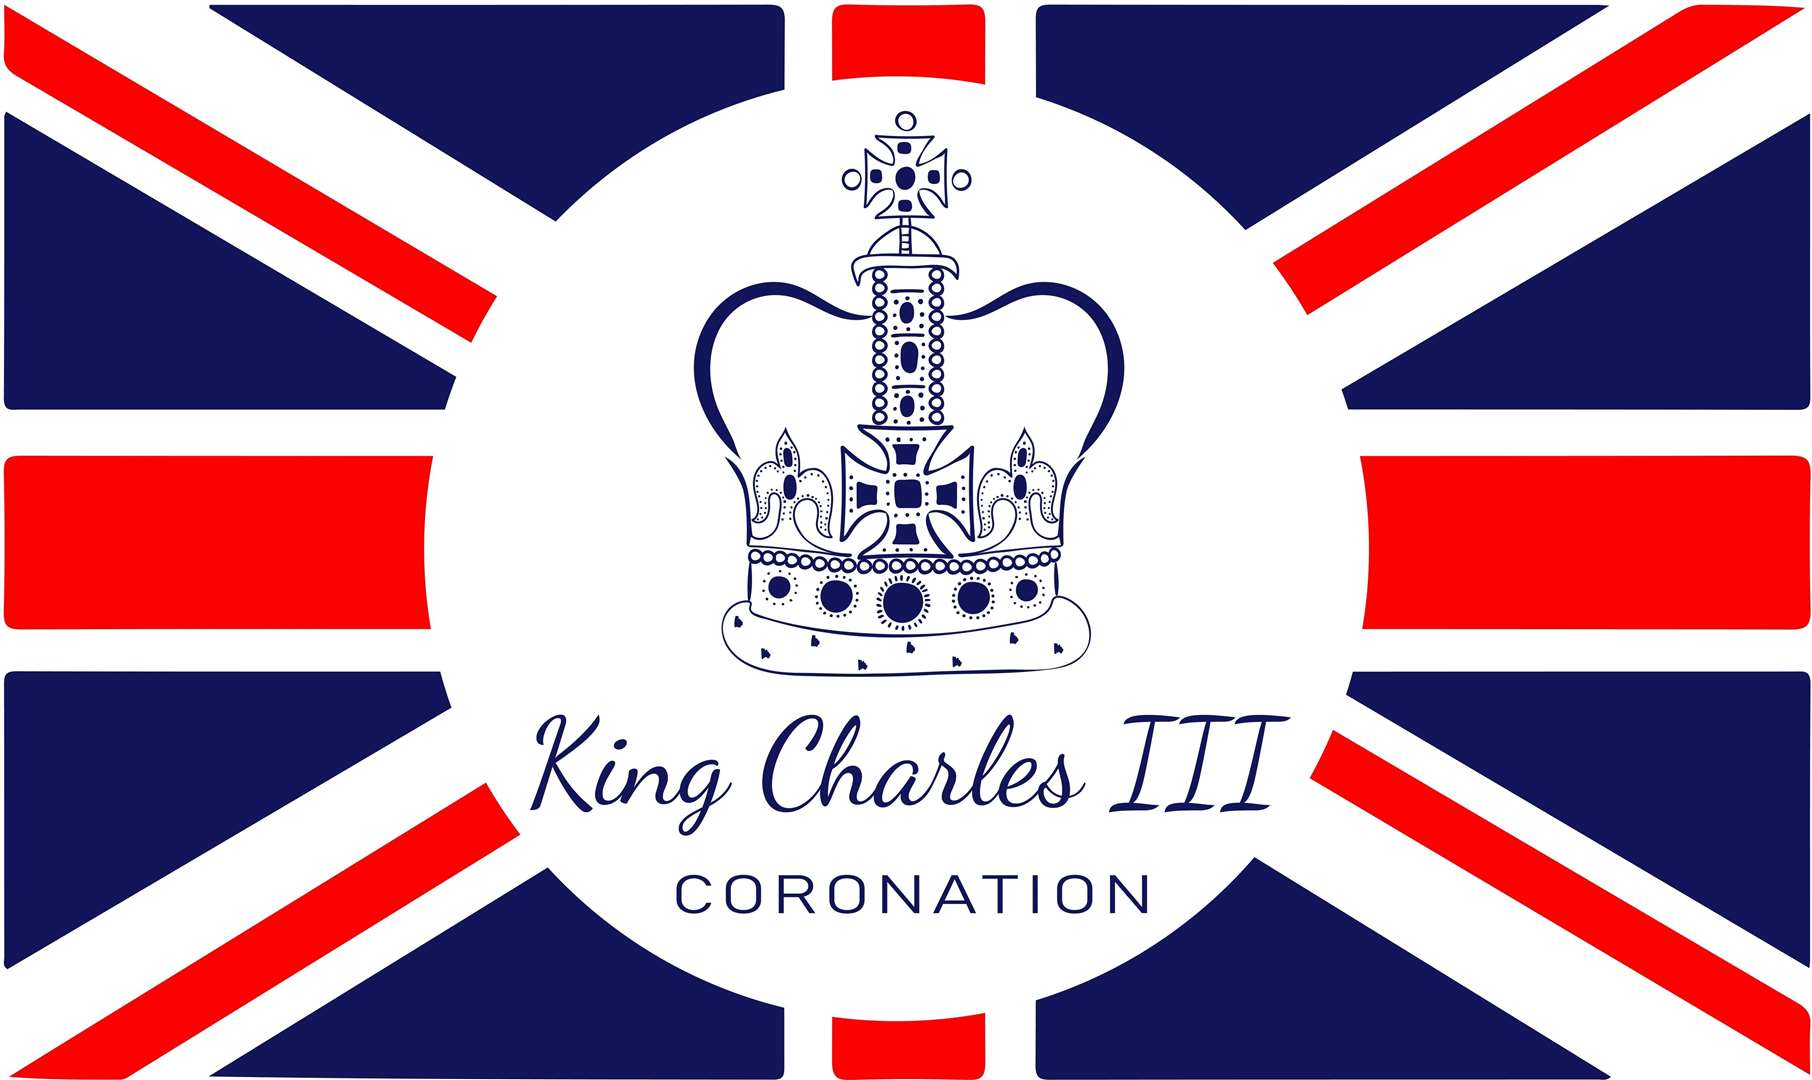 Local communities are working on their celebrations to mark the coronation of King Charles III.